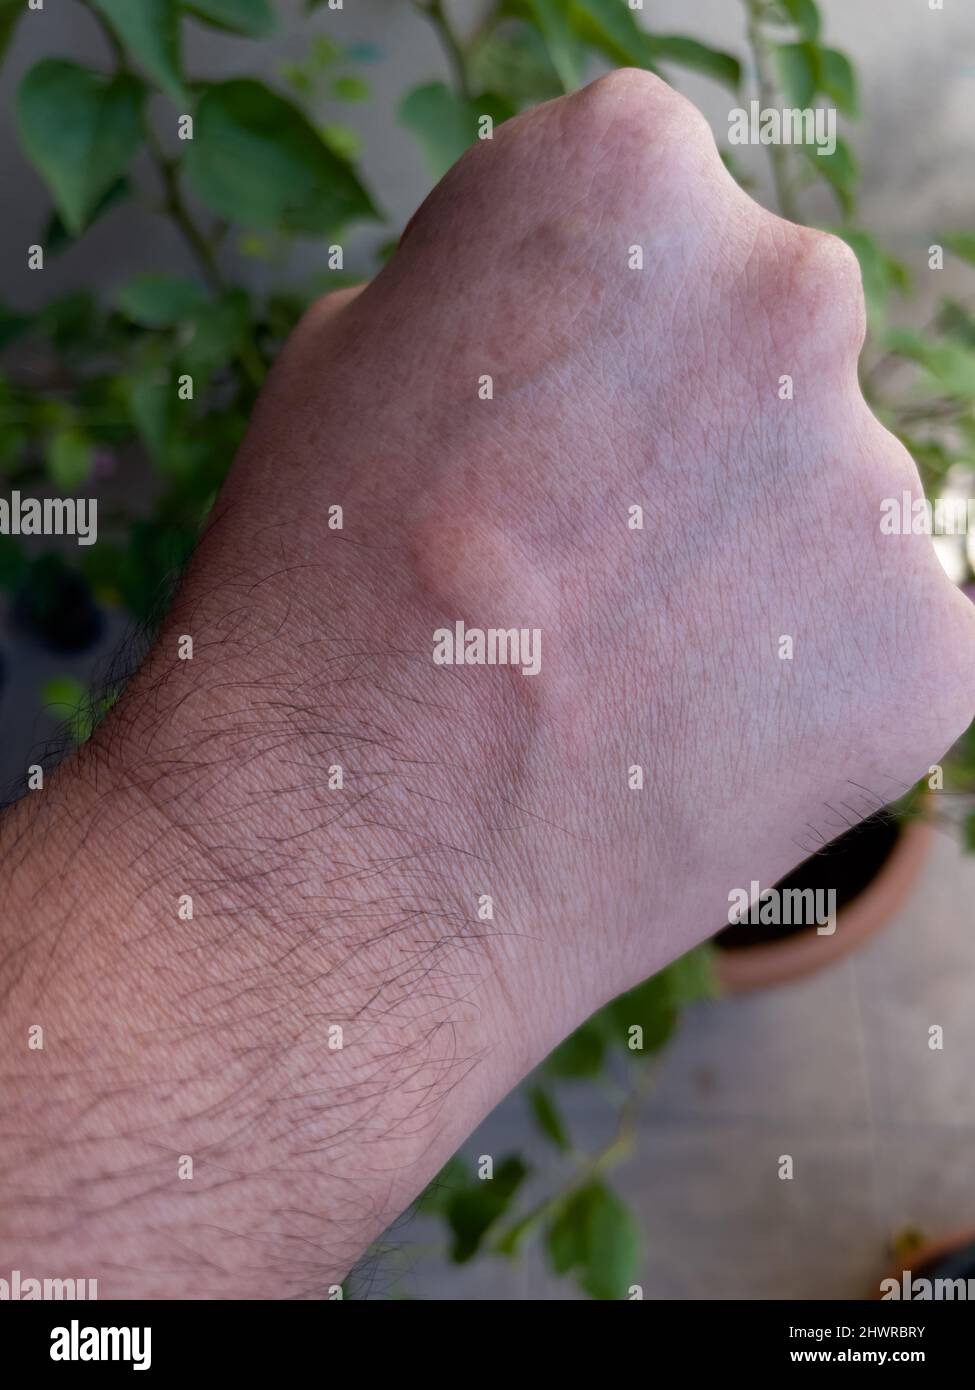 Close-up view of the swelling on back of the palm, due to insect or bug bite in the garden. Stock Photo